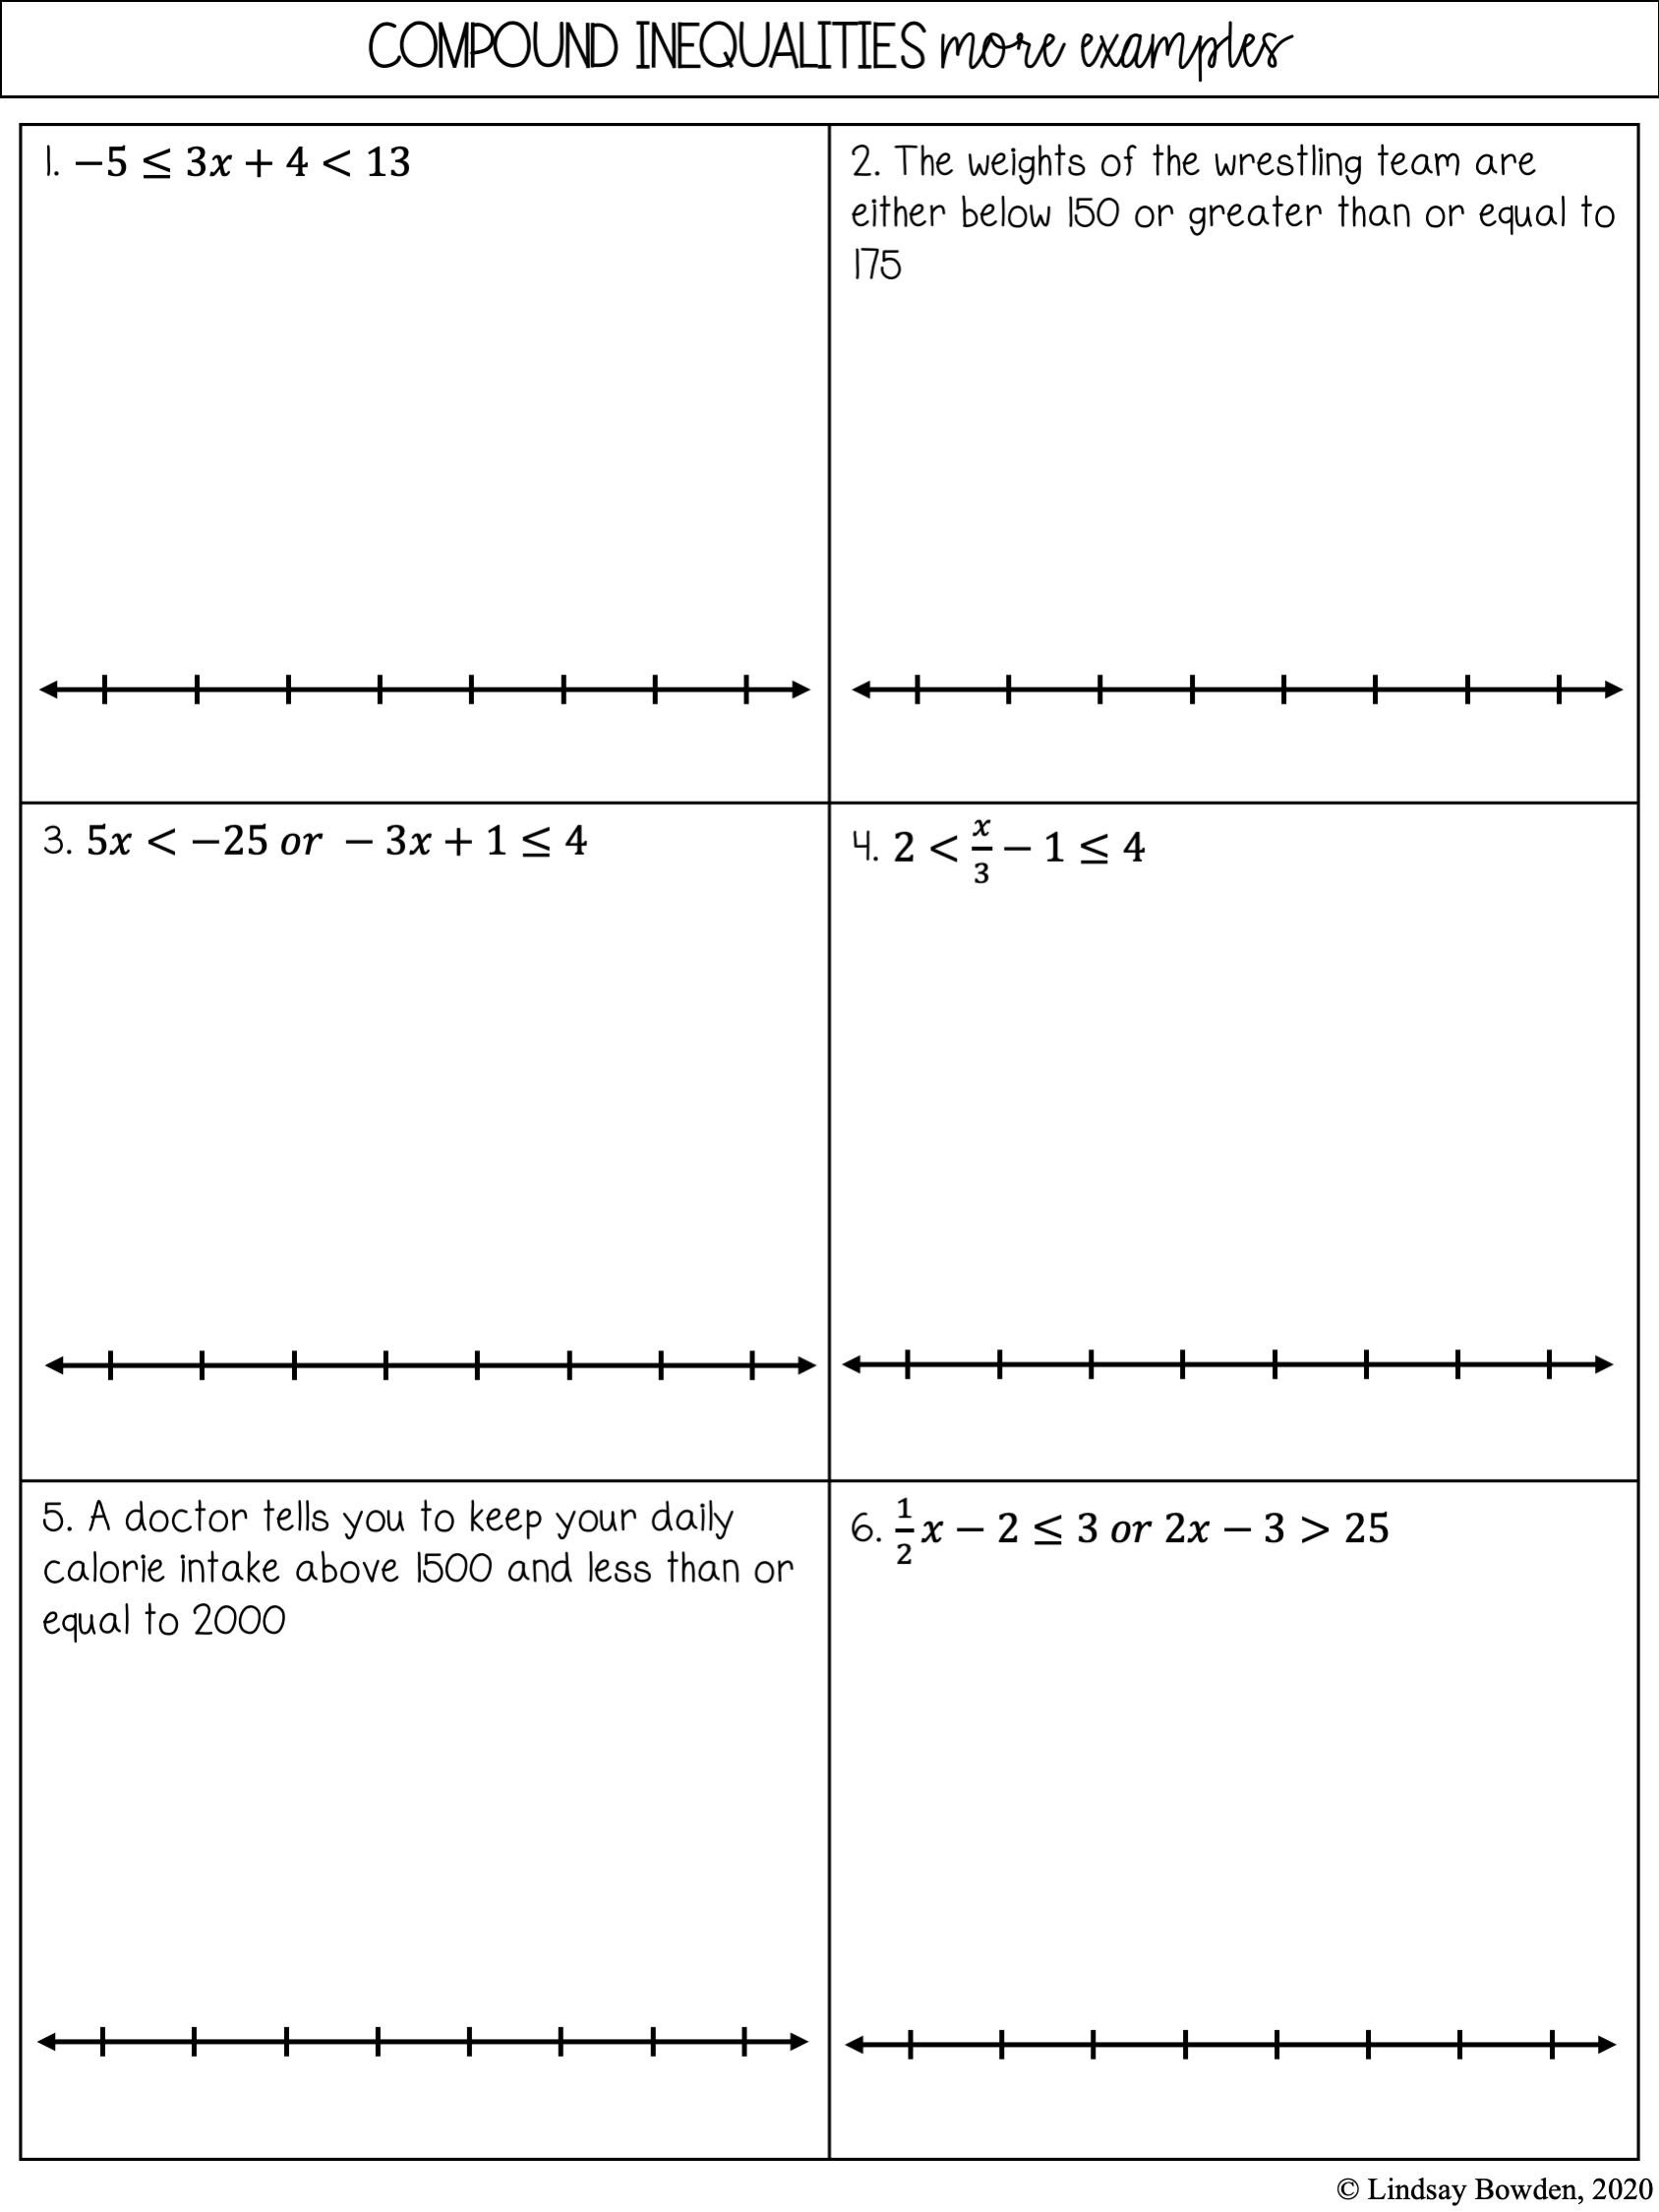 Compound Inequalities Notes and Worksheets - Lindsay Bowden Throughout Solving Compound Inequalities Worksheet